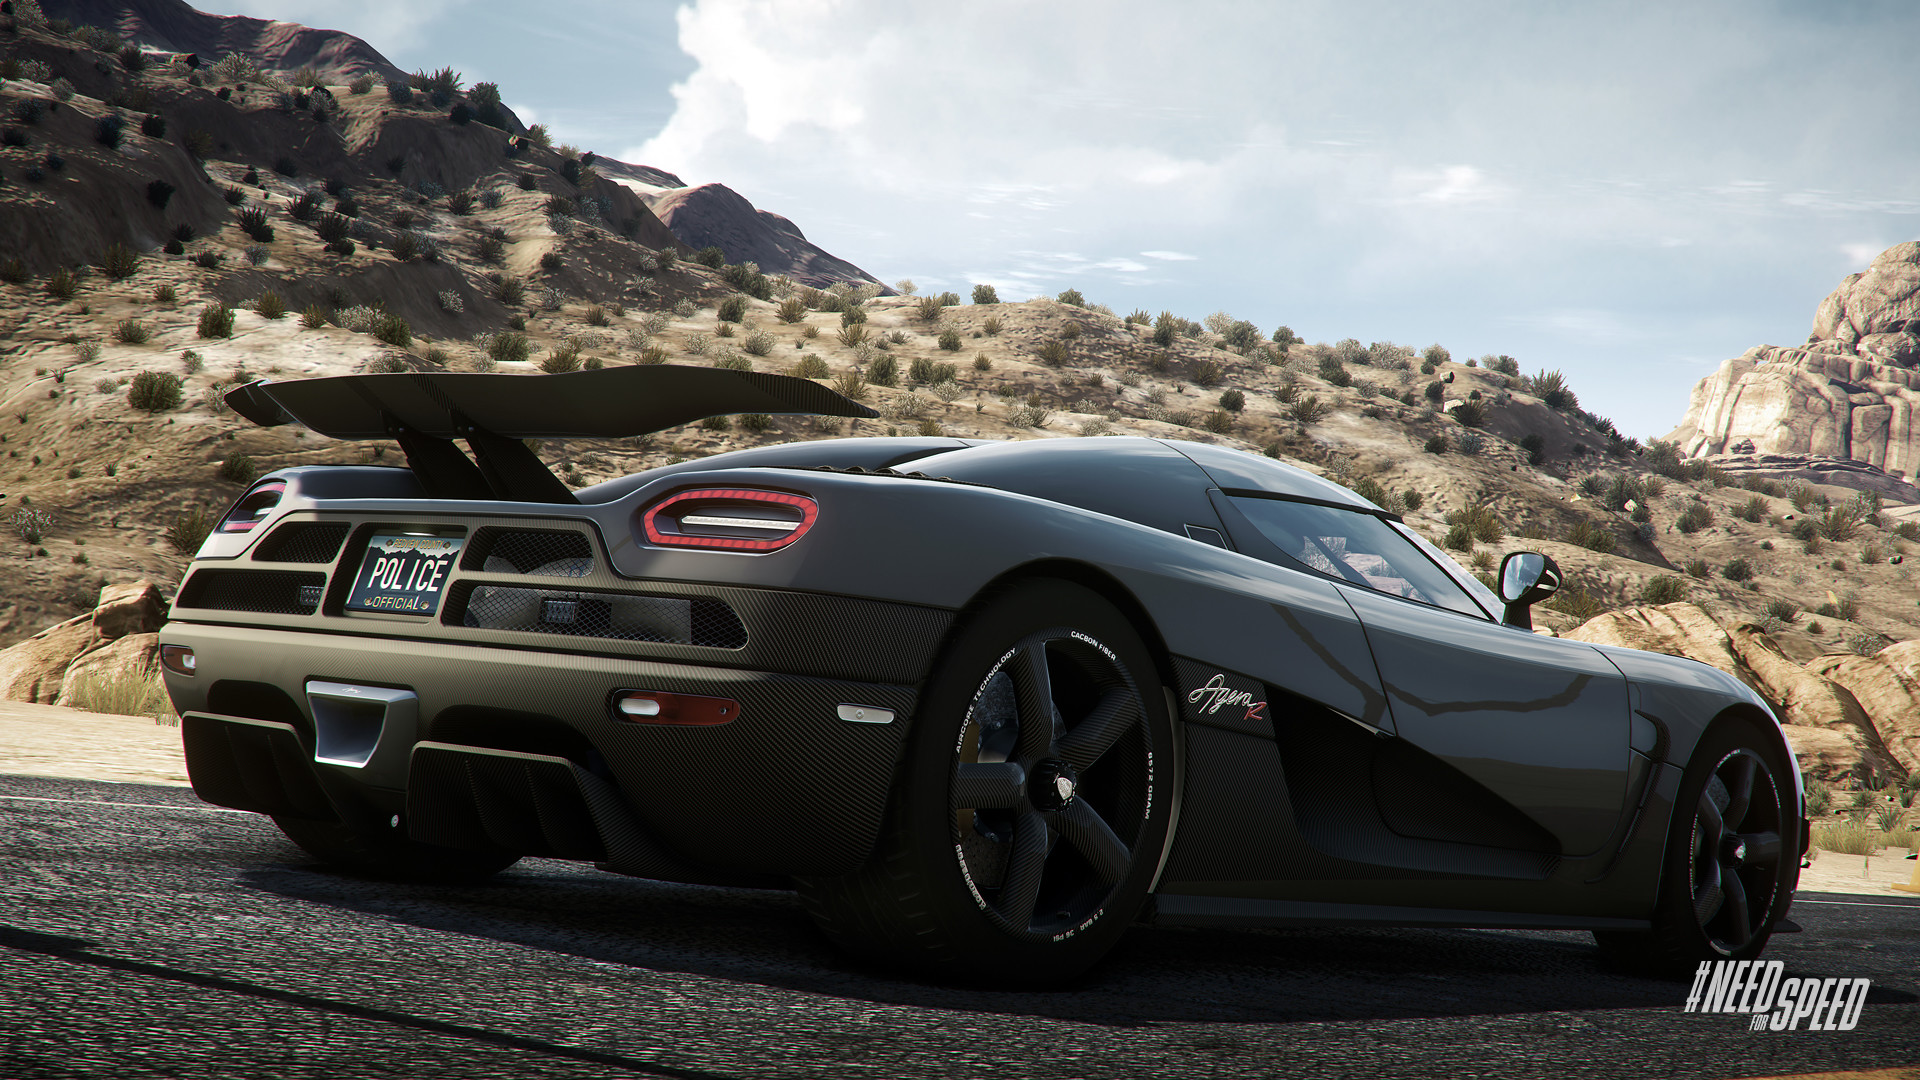 download need for speed rivals pc